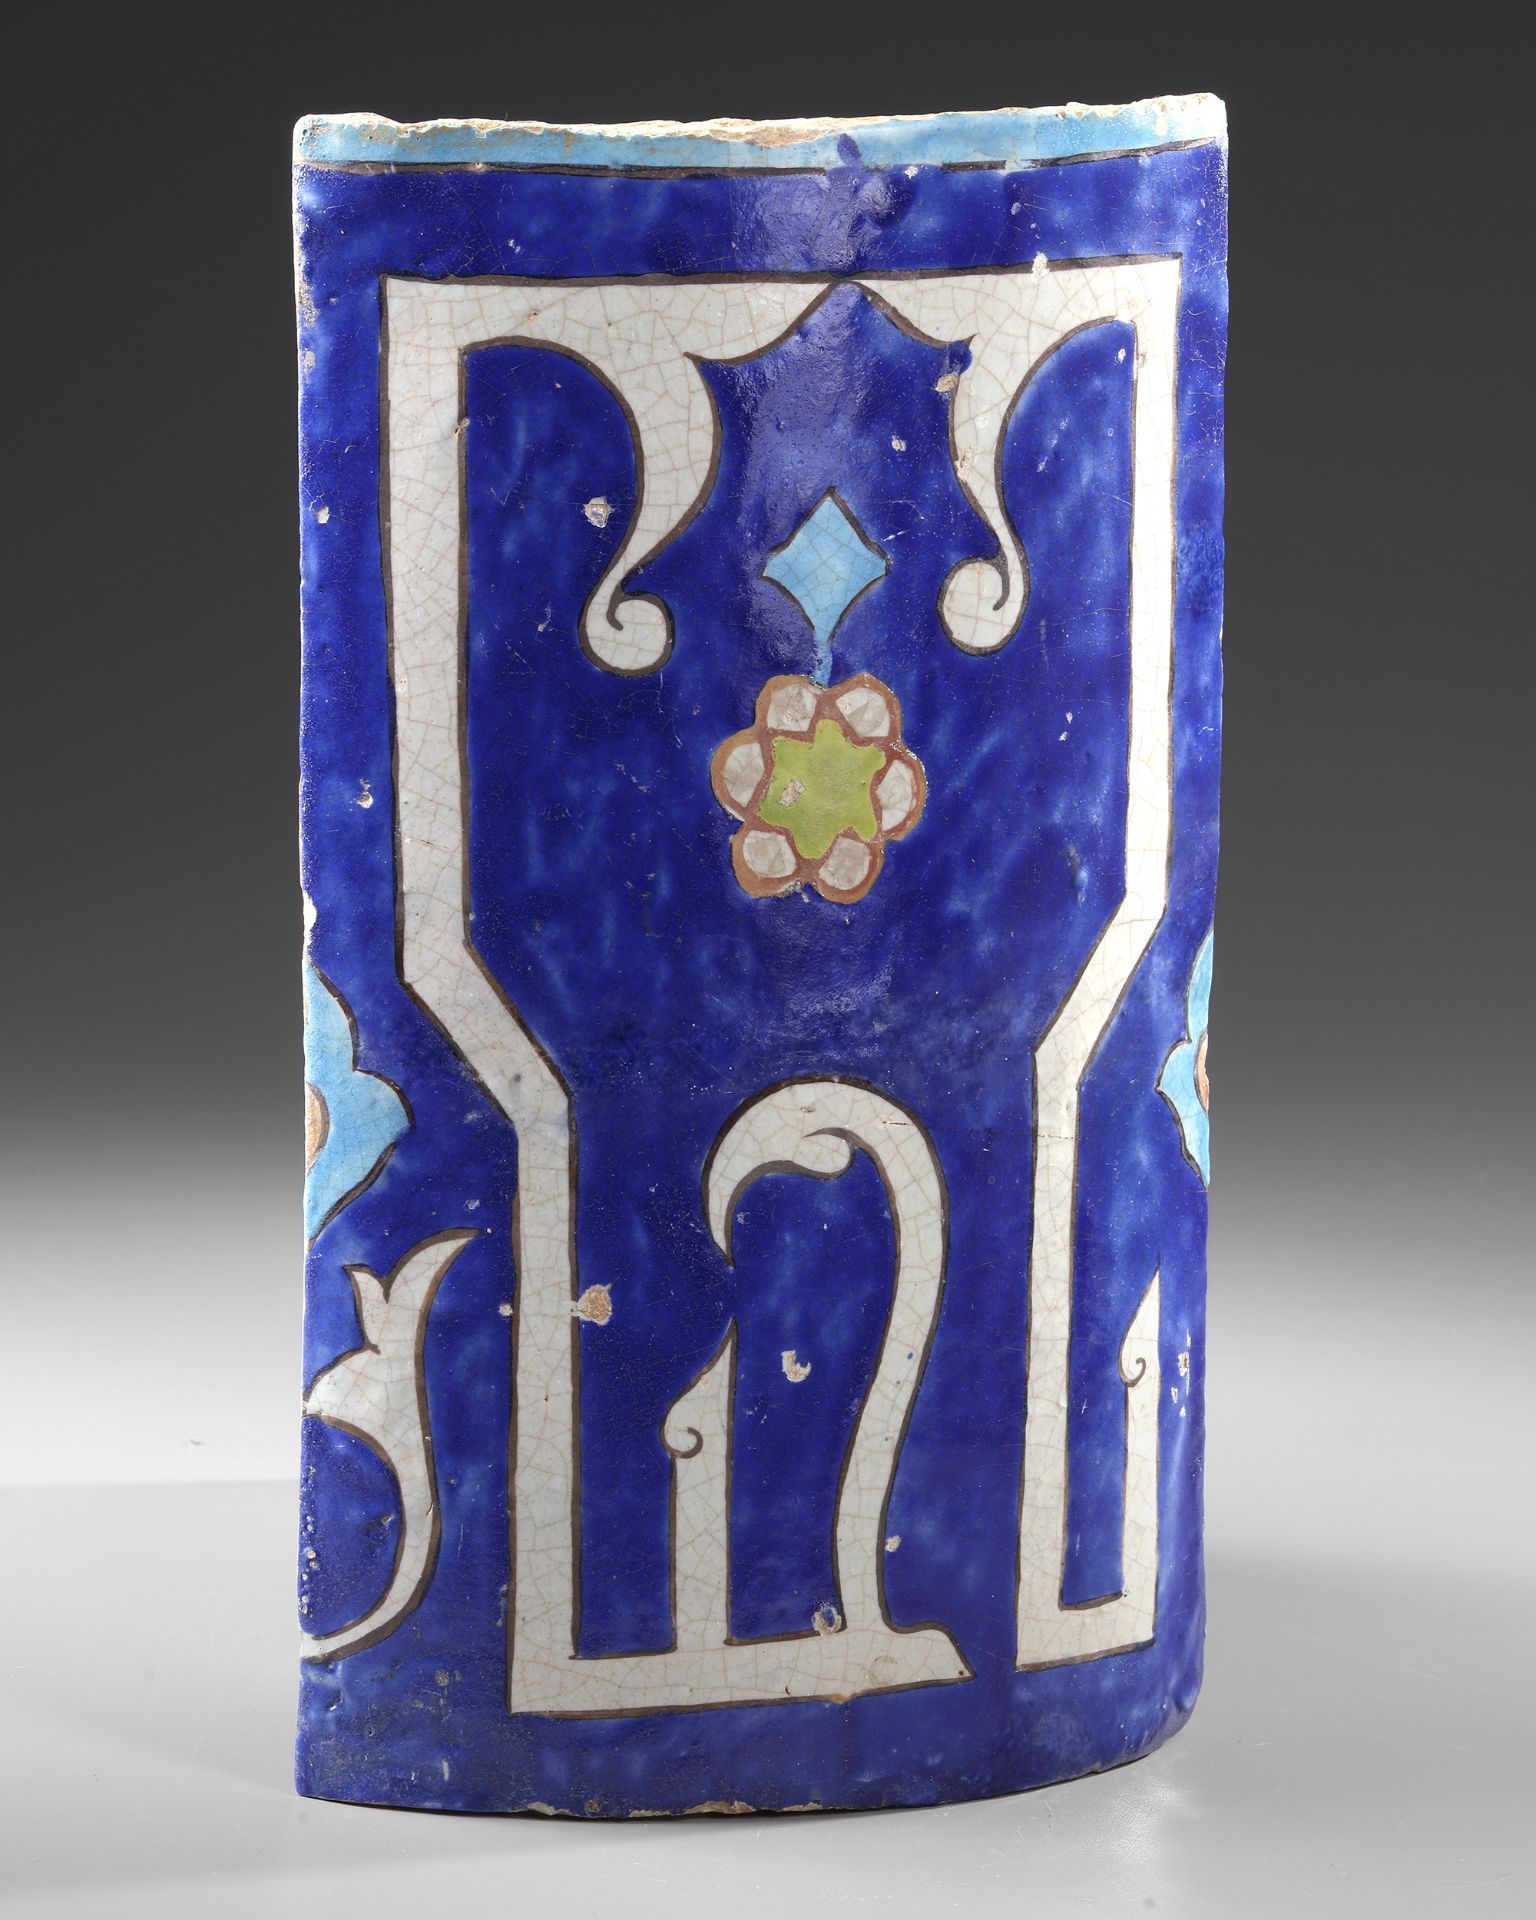 A TIMURID CALLIGRAPHIC POTTERY TILE, CENTRAL ASIA OR EASTERN PERSIA, 14TH-15TH CENTURY - Image 5 of 10